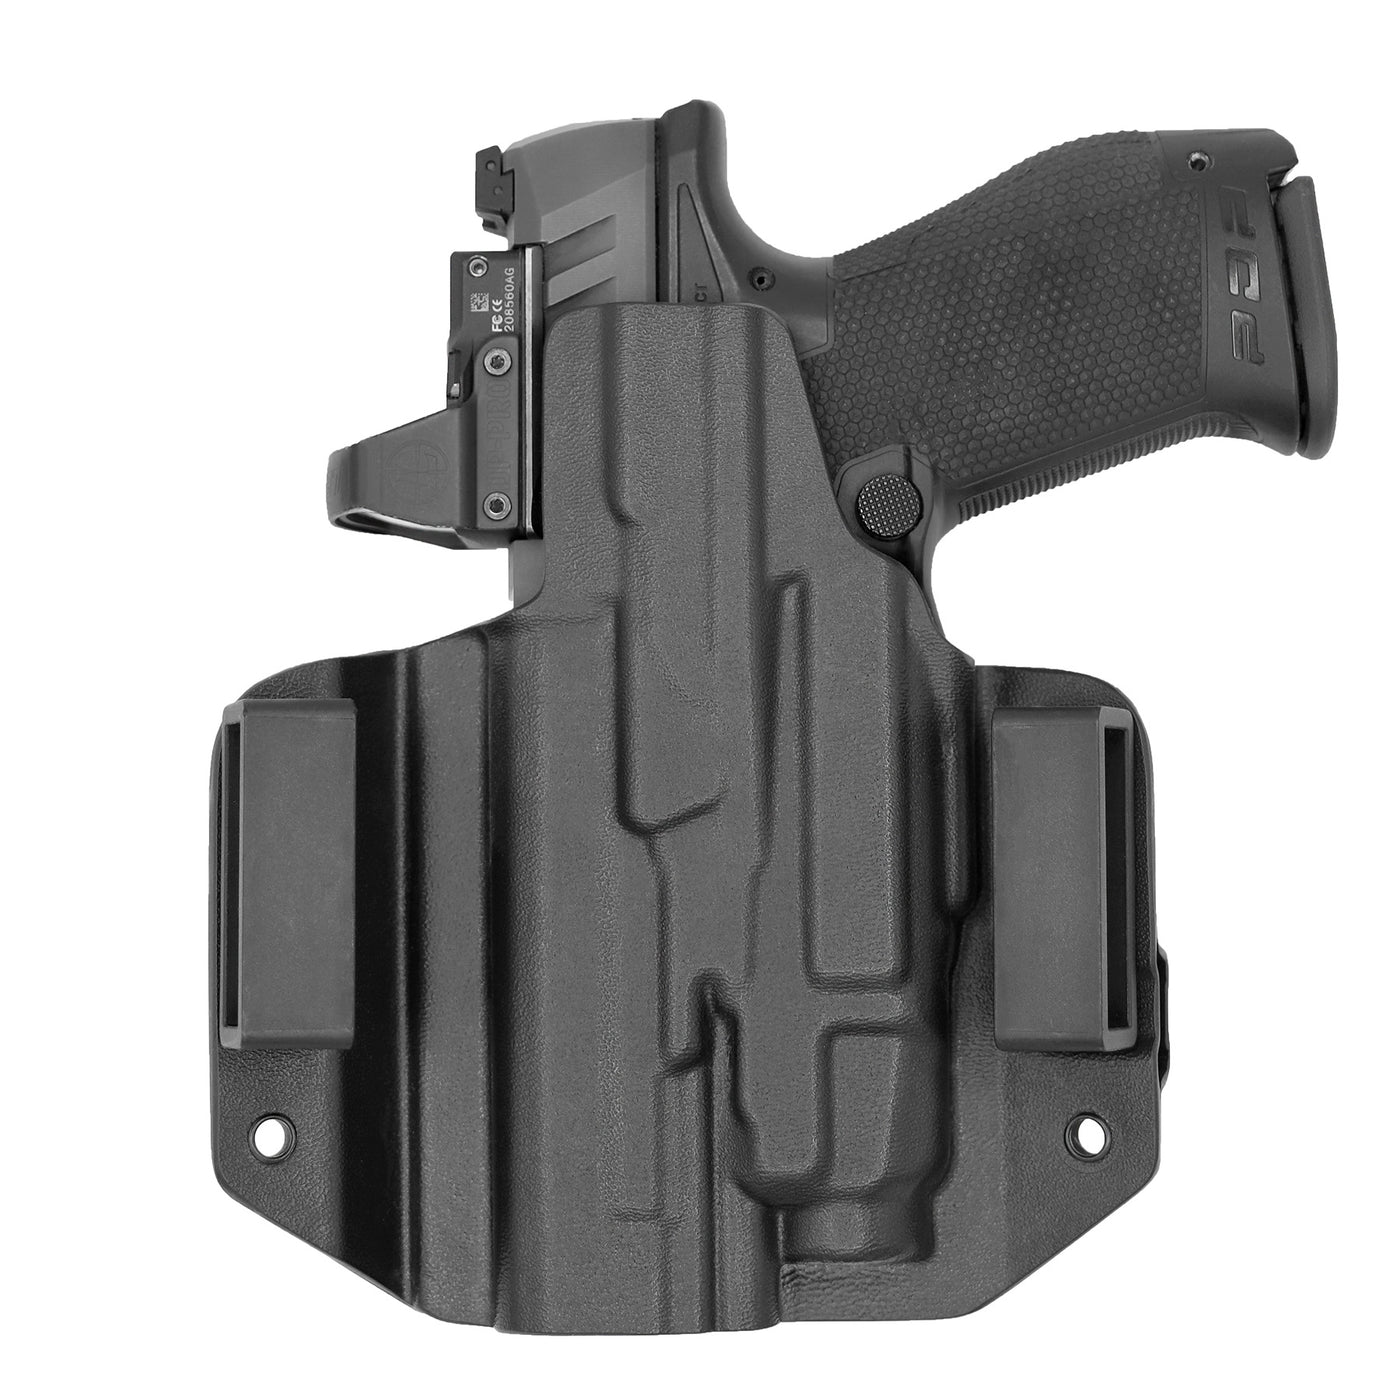 C&G Holsters Quickship OWB Tactical Walther PDP Streamlight TLR7/a in holstered position back view